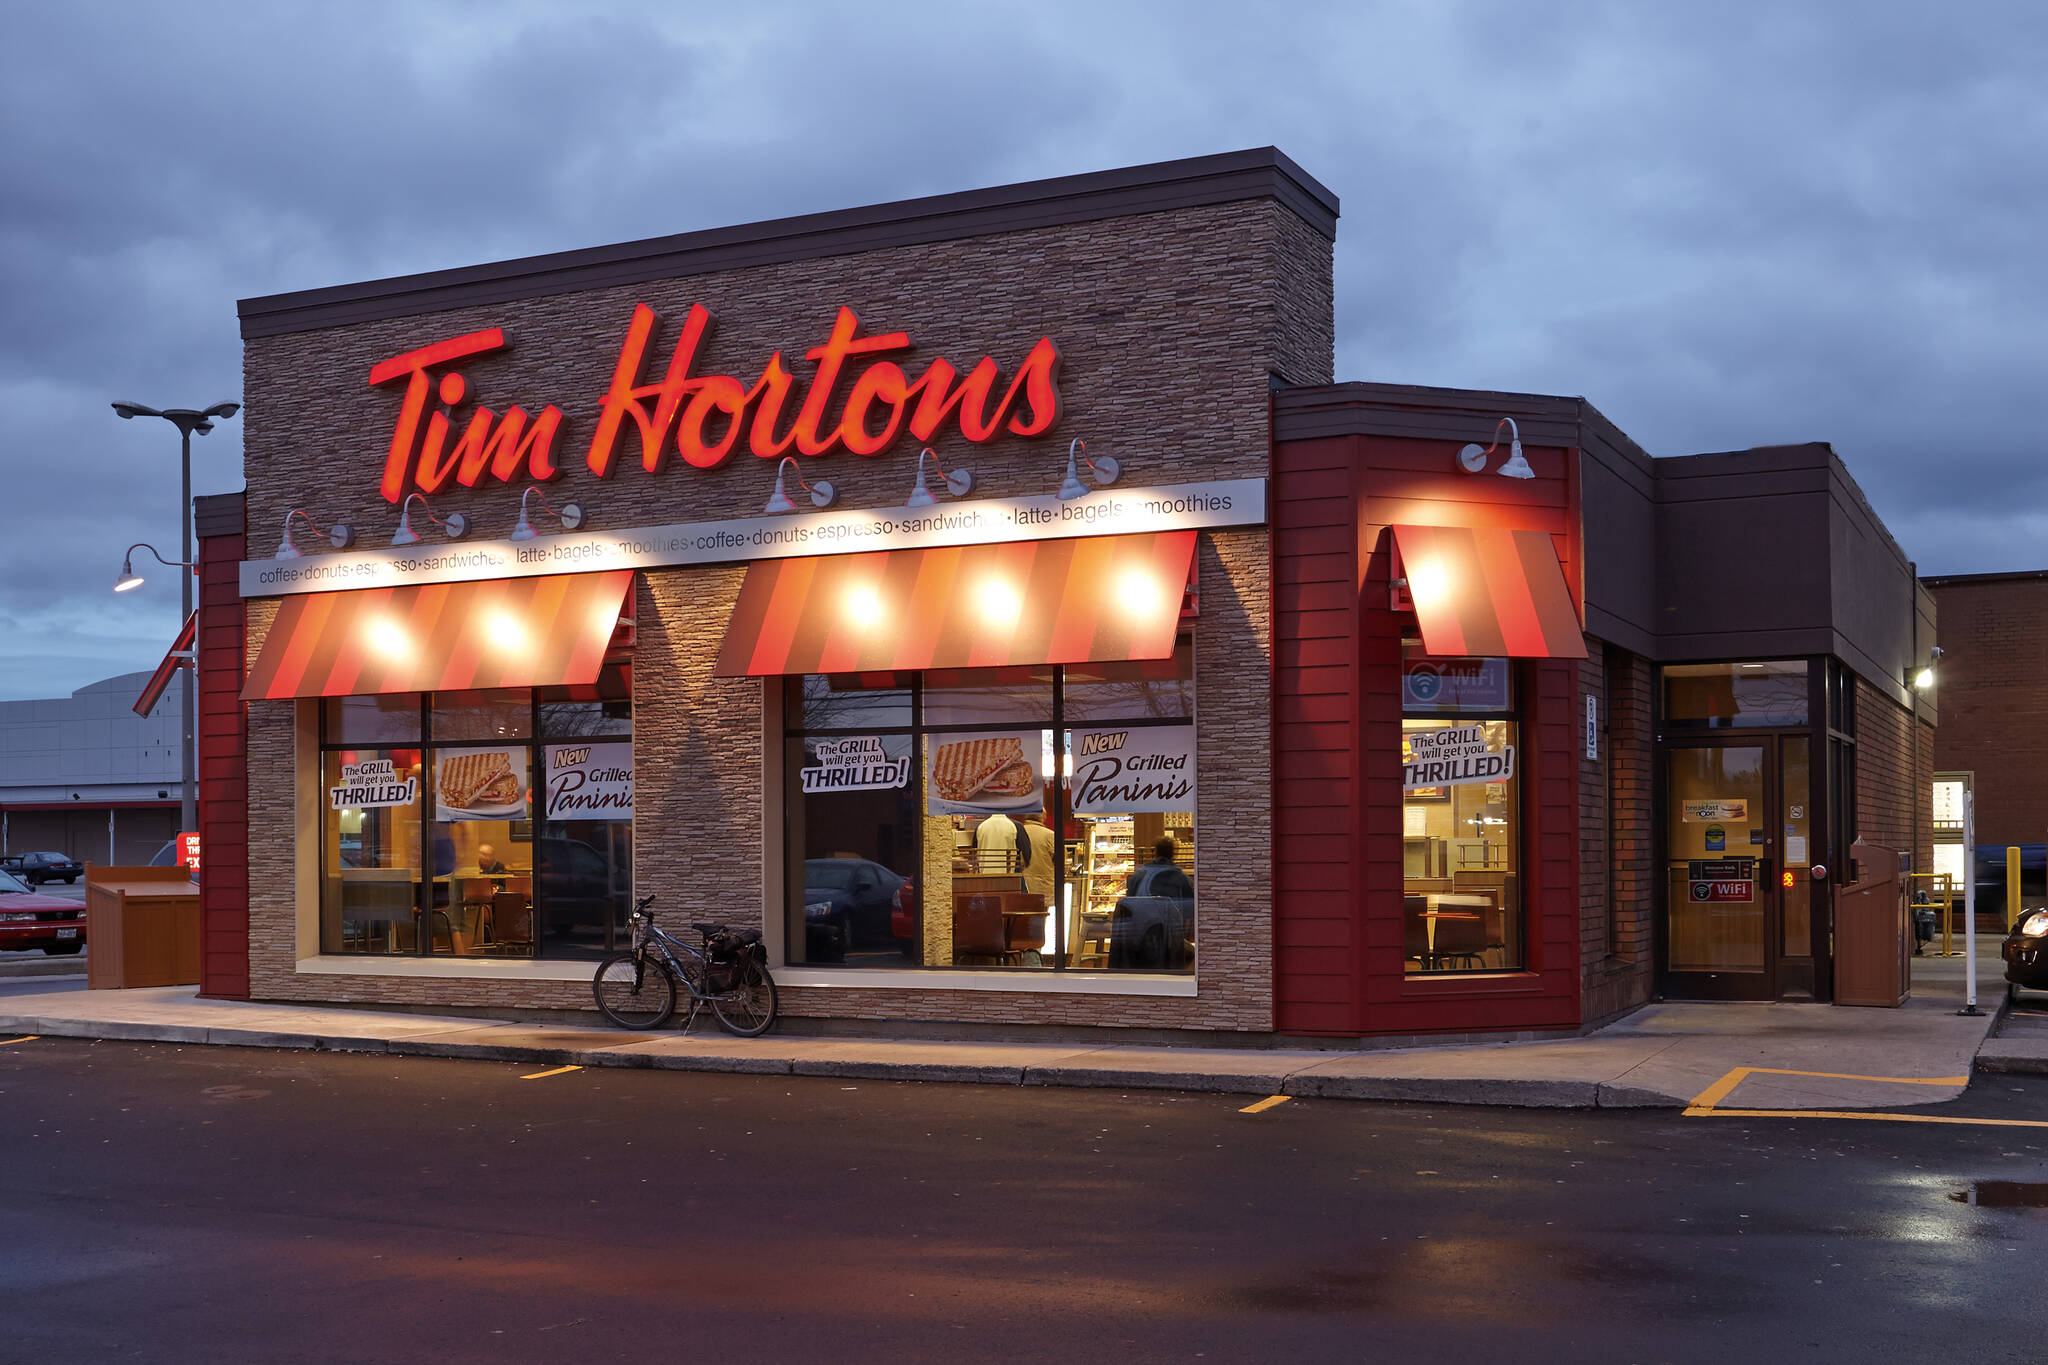 Tim Hortons officially reveals plans for new high end cafe in Toronto